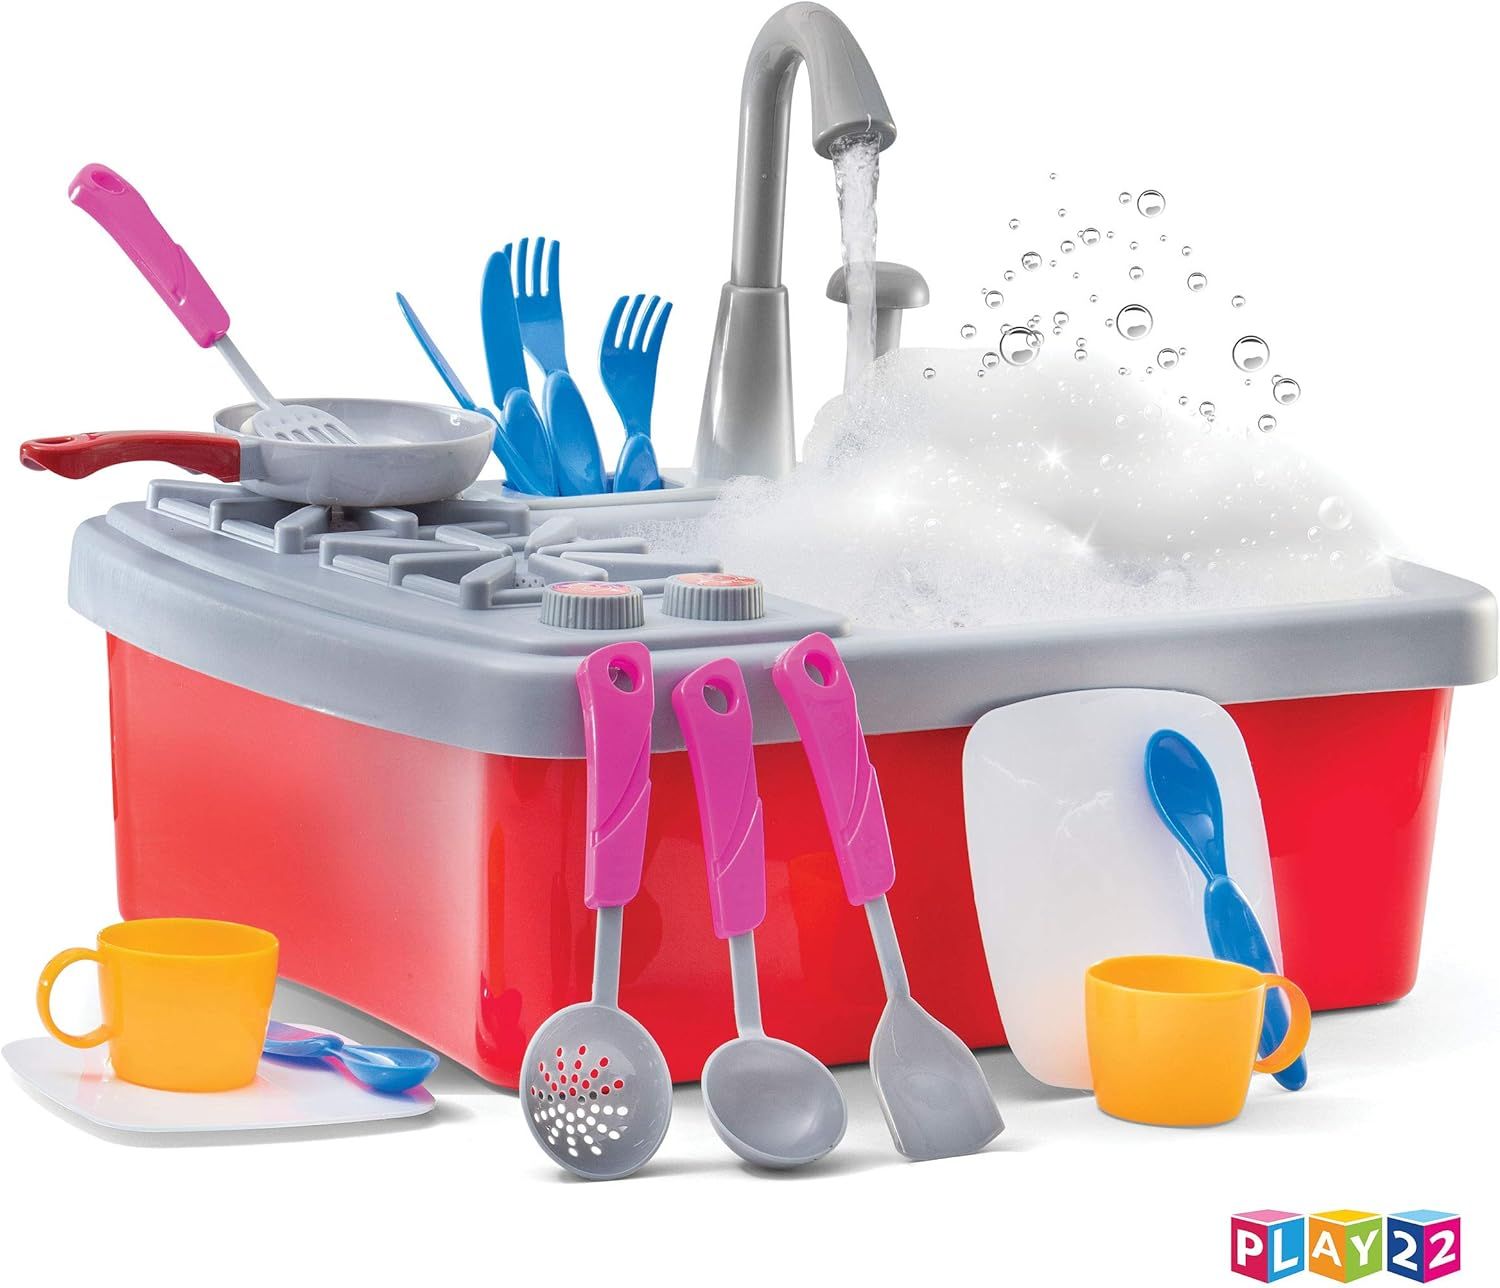 Play22 Kitchen Sink Toy 17 Set - Play Sink Play House Pretend Toy Kitchen Sink with Running Water... | Amazon (US)